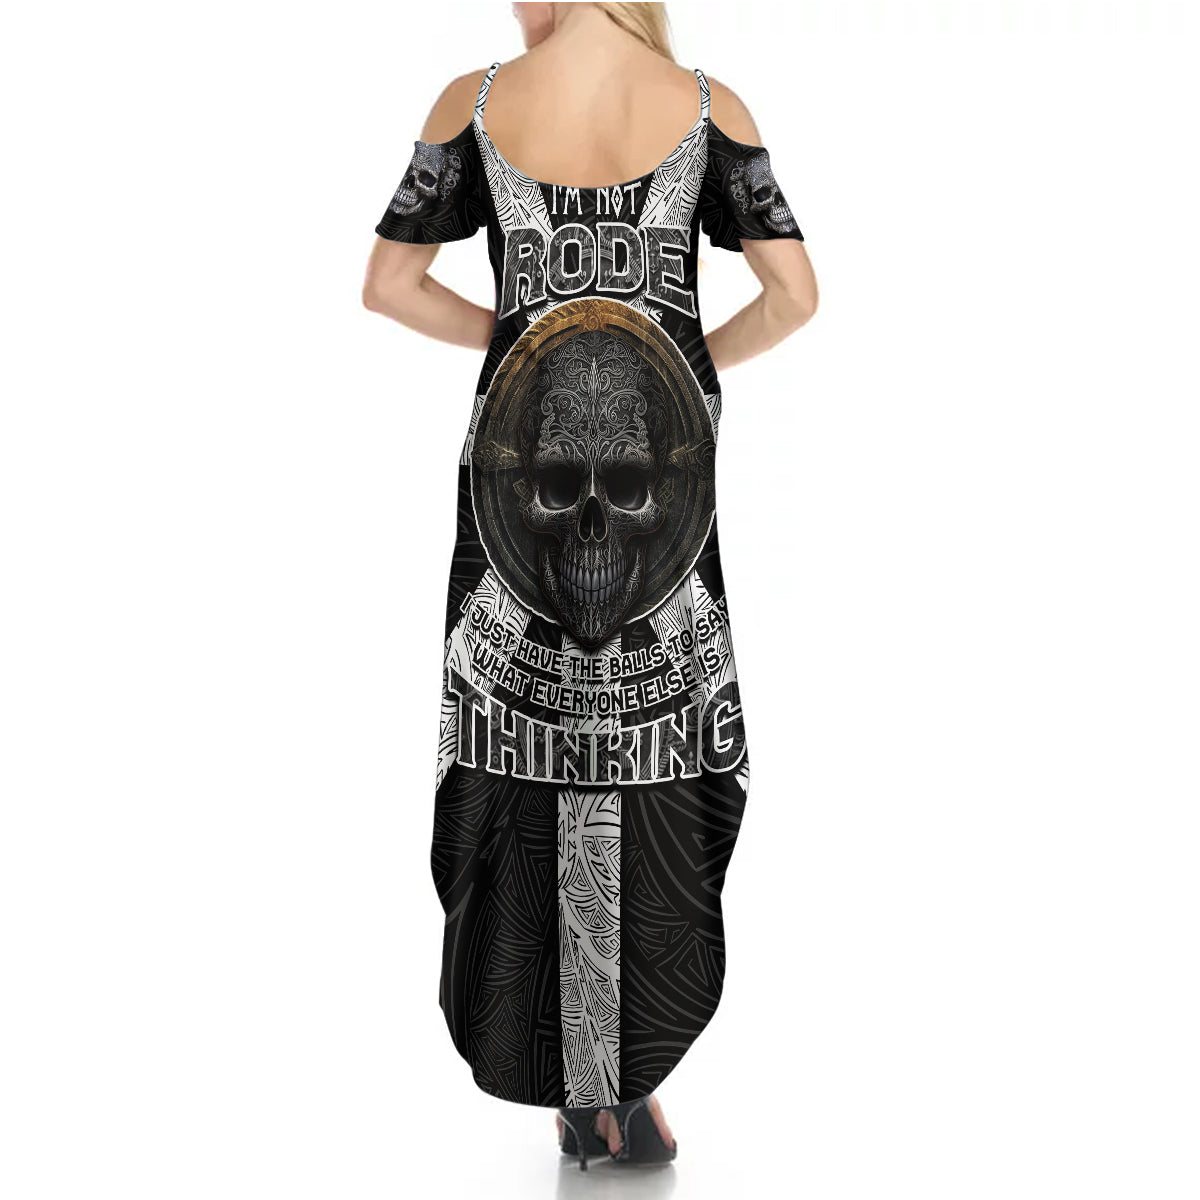 hell-pattern-skull-summer-maxi-dress-im-not-rode-i-just-hace-the-balls-to-say-what-everyone-else-is-thinking